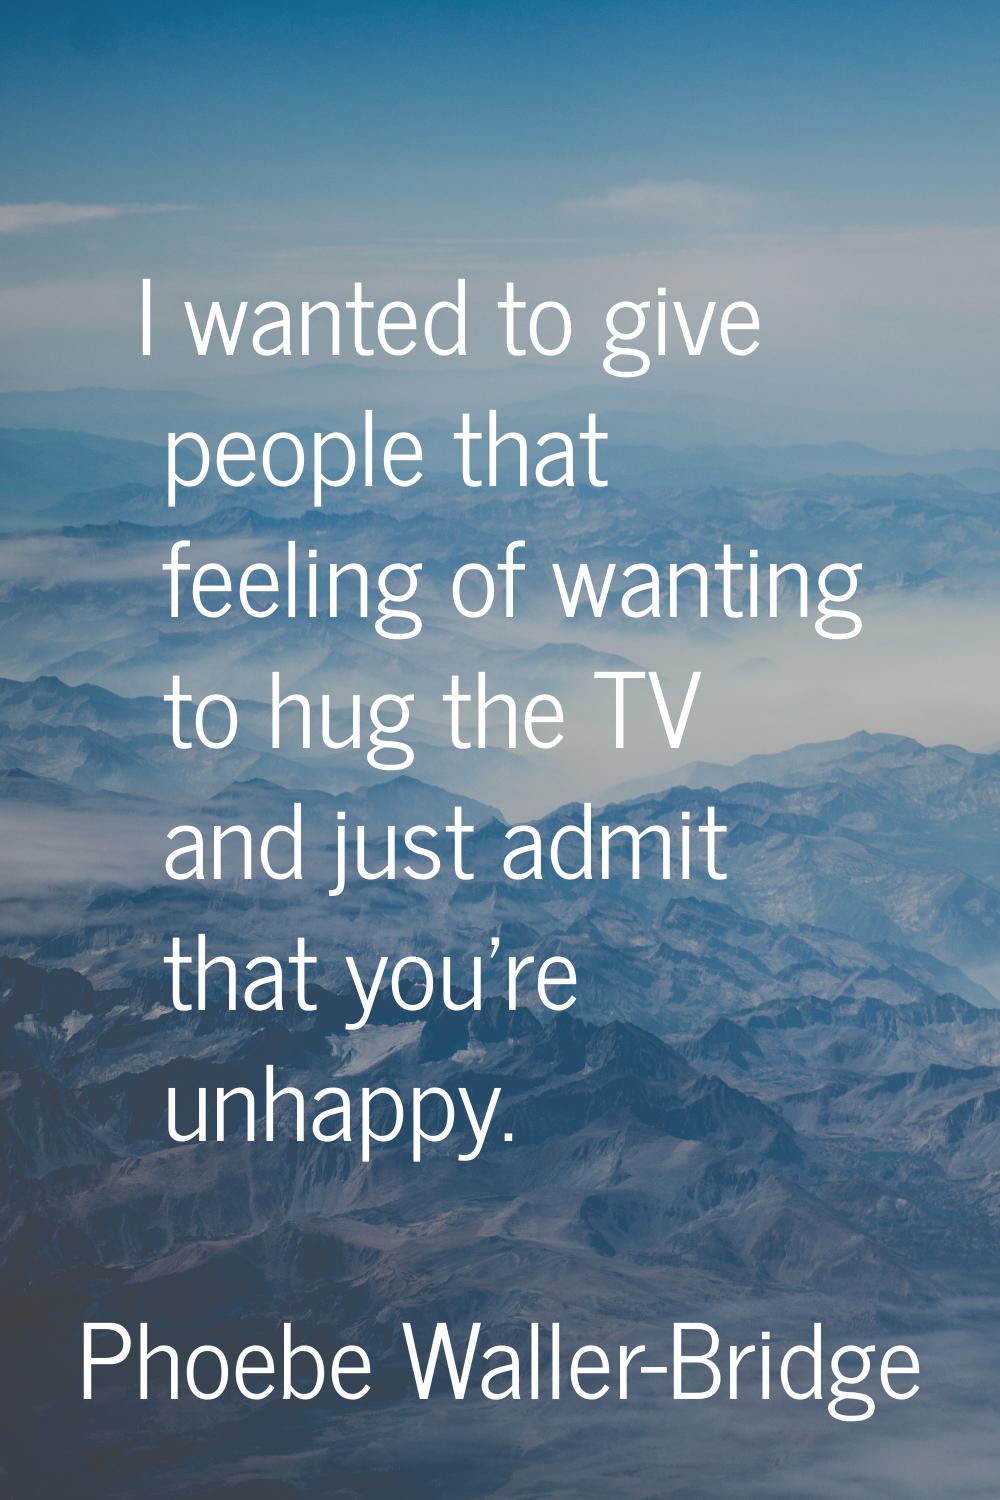 I wanted to give people that feeling of wanting to hug the TV and just admit that you're unhappy.